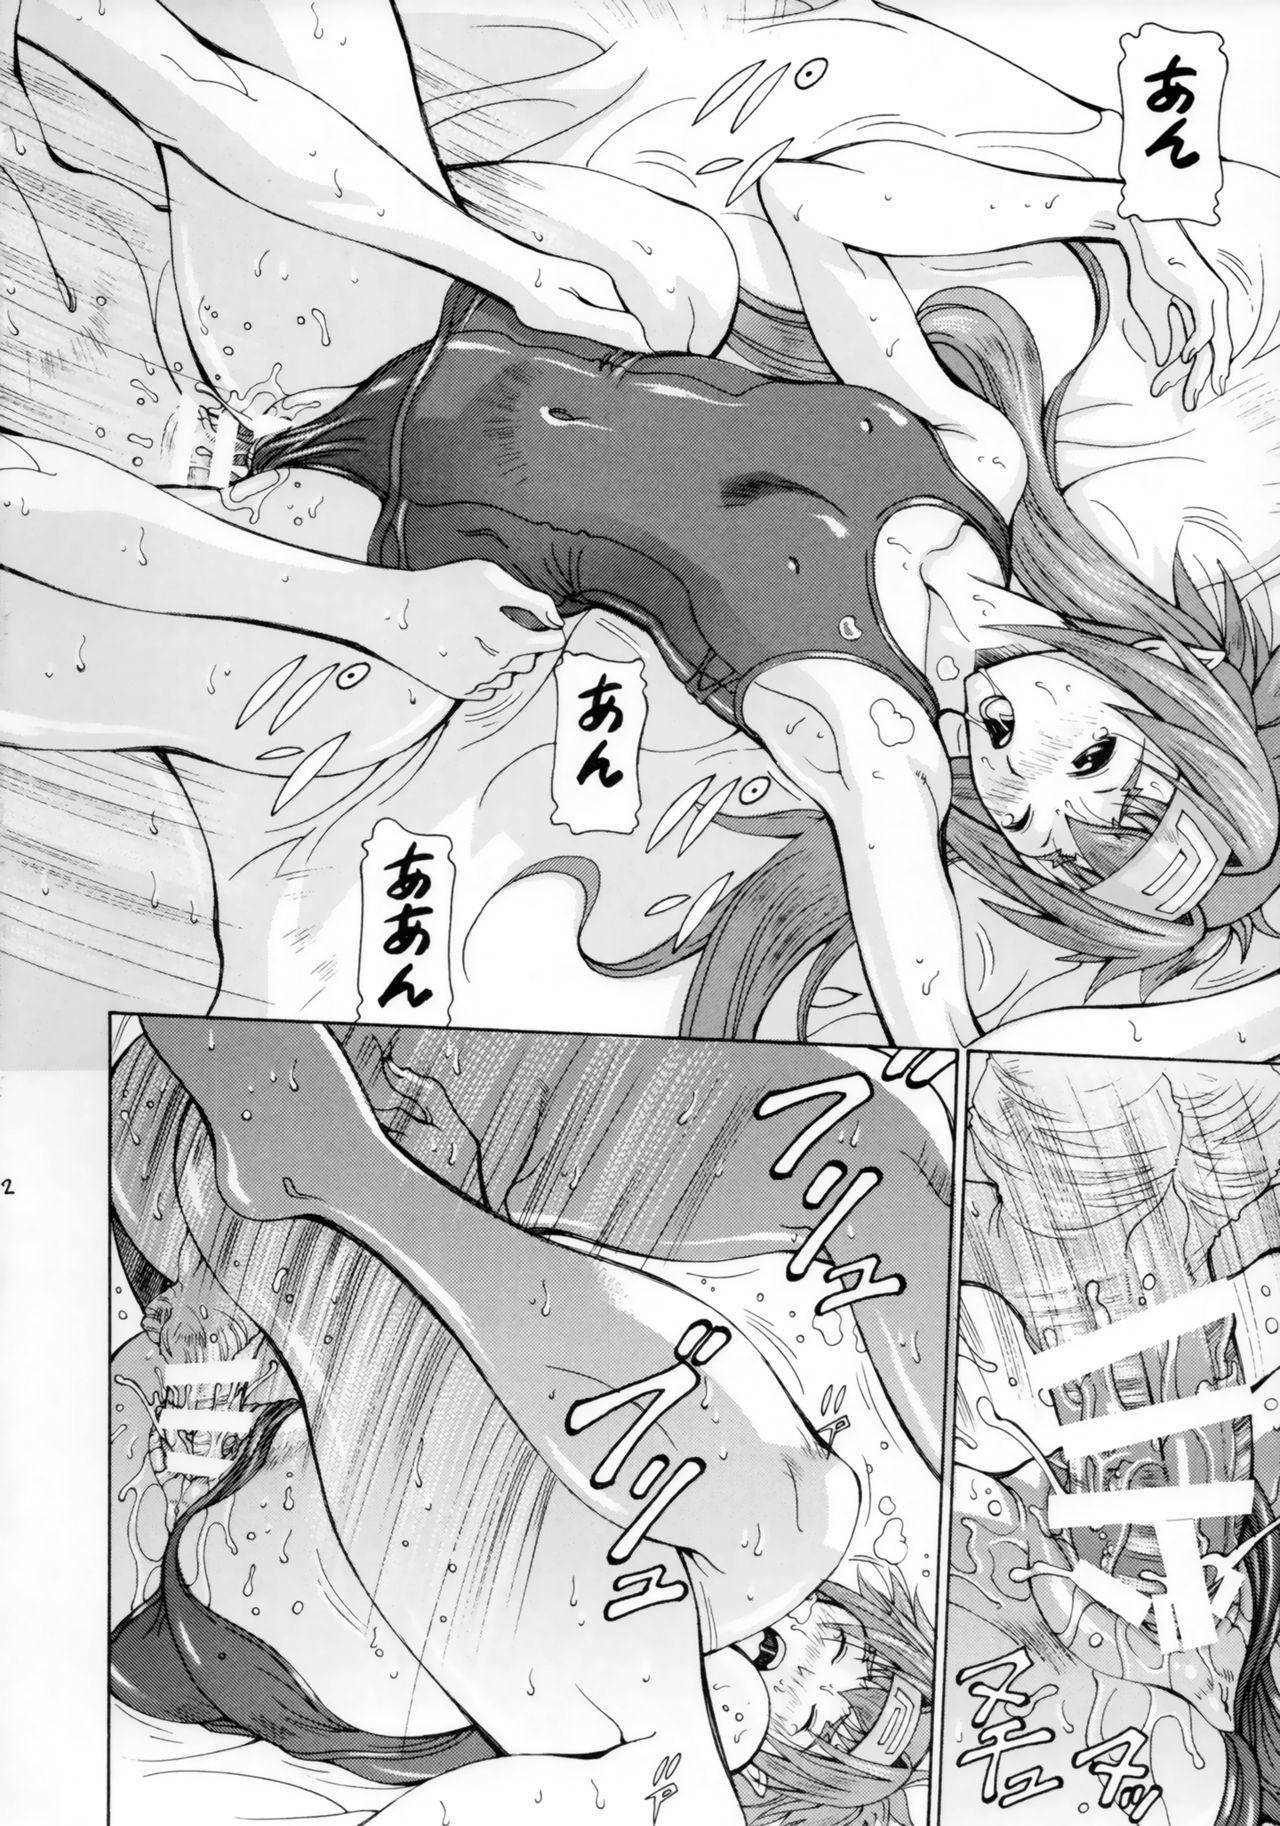 Striptease 2008 Fuyu no Deculture - Macross frontier Twinks - Page 11